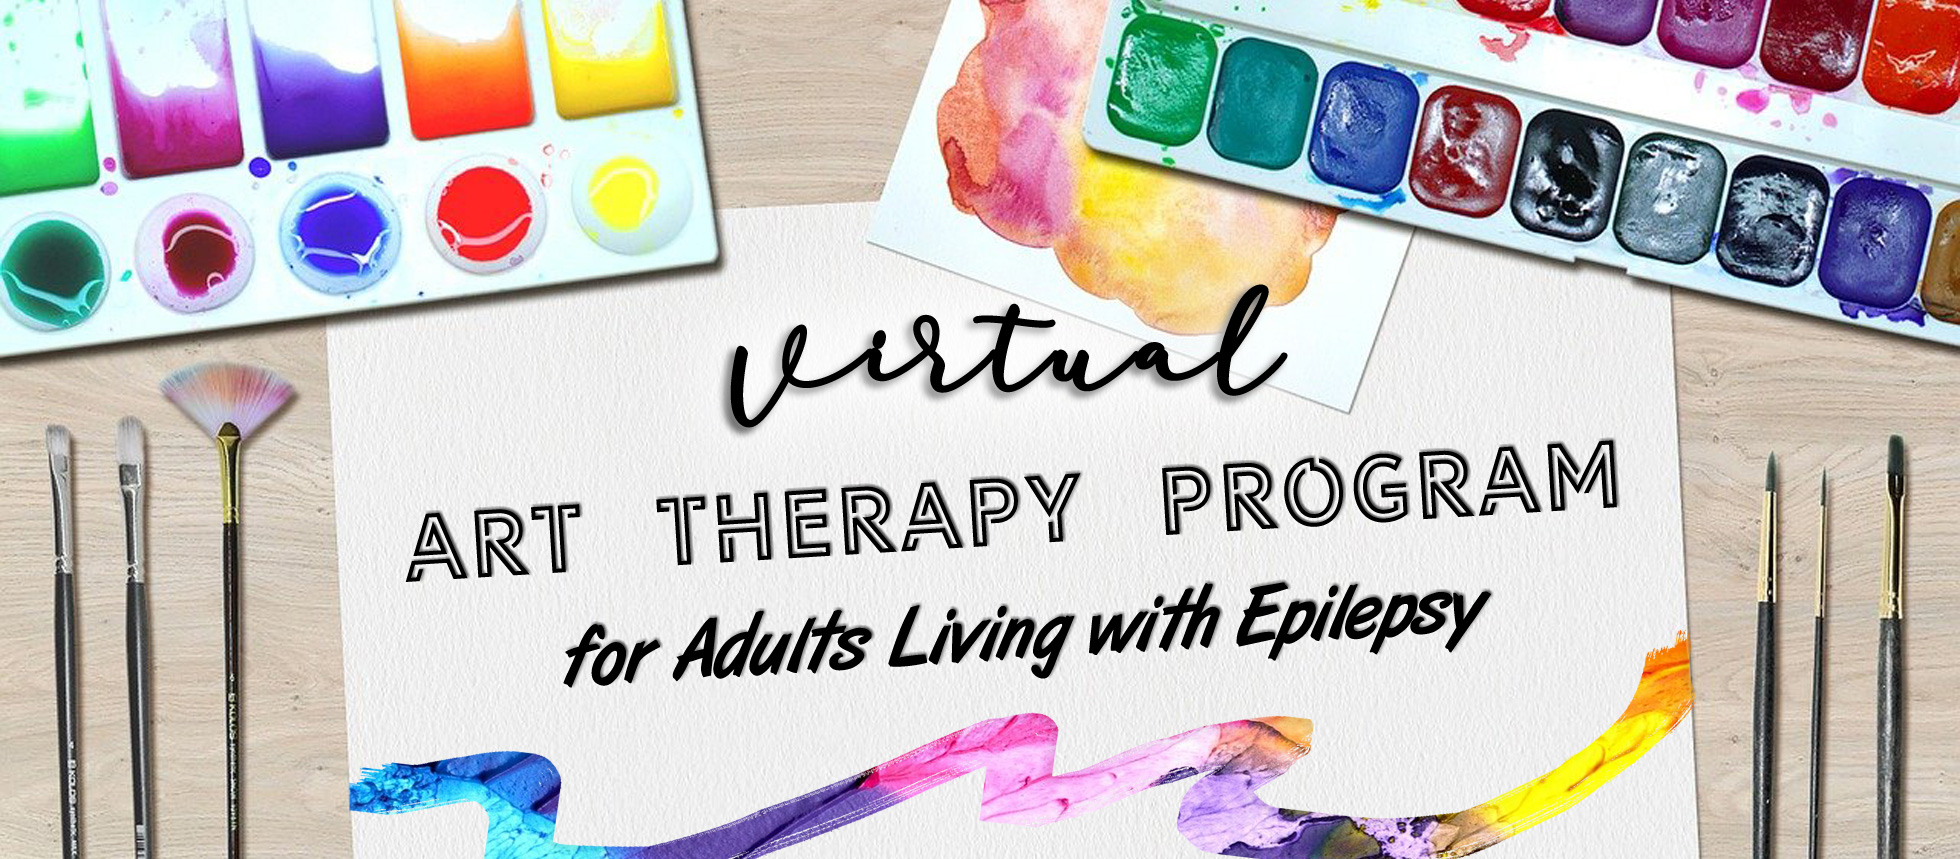 Adult Art Therapy